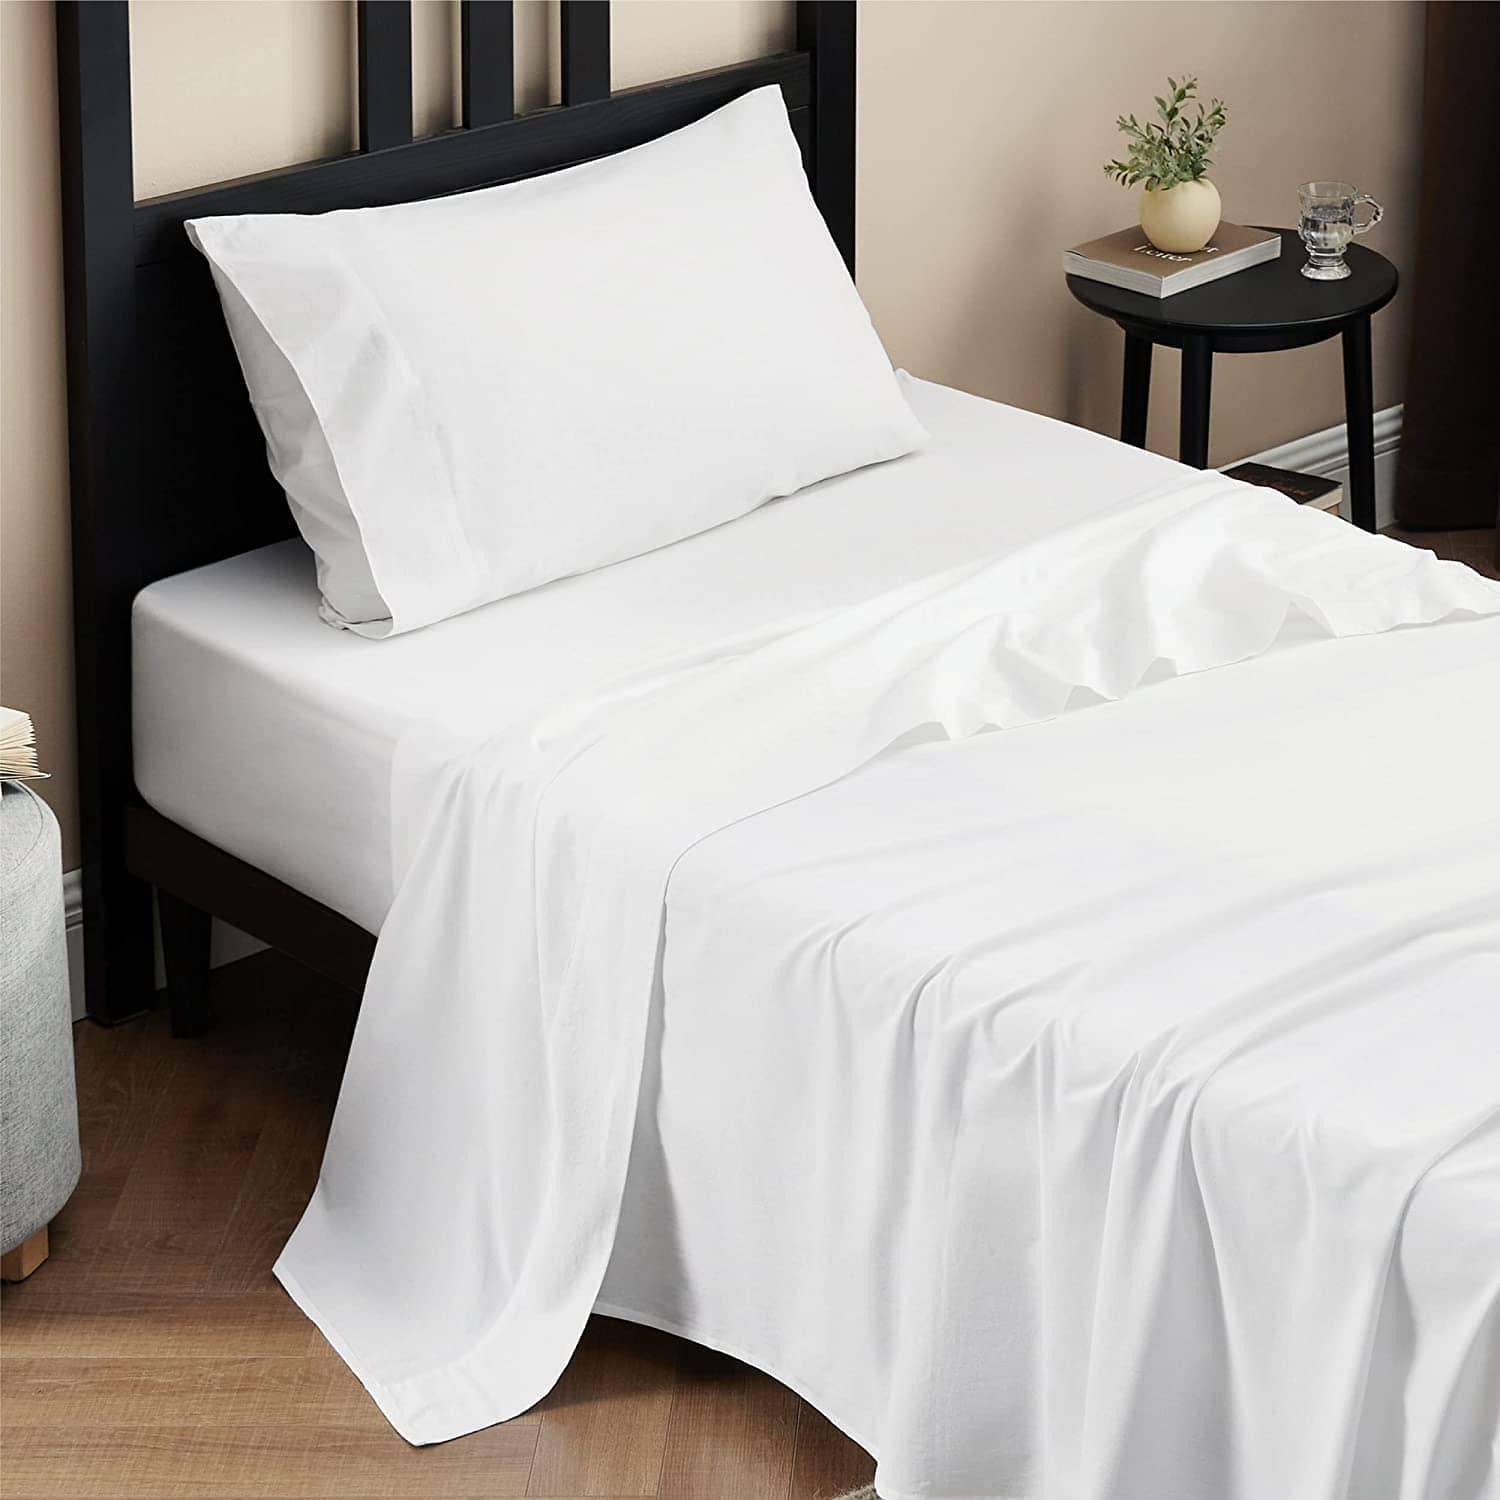 Bedsure Deep Pocket Full Size Sheets - Ultra Soft Cationic Dyed Full Bed  Sheets, Fits Mattresses Up …See more Bedsure Deep Pocket Full Size Sheets 